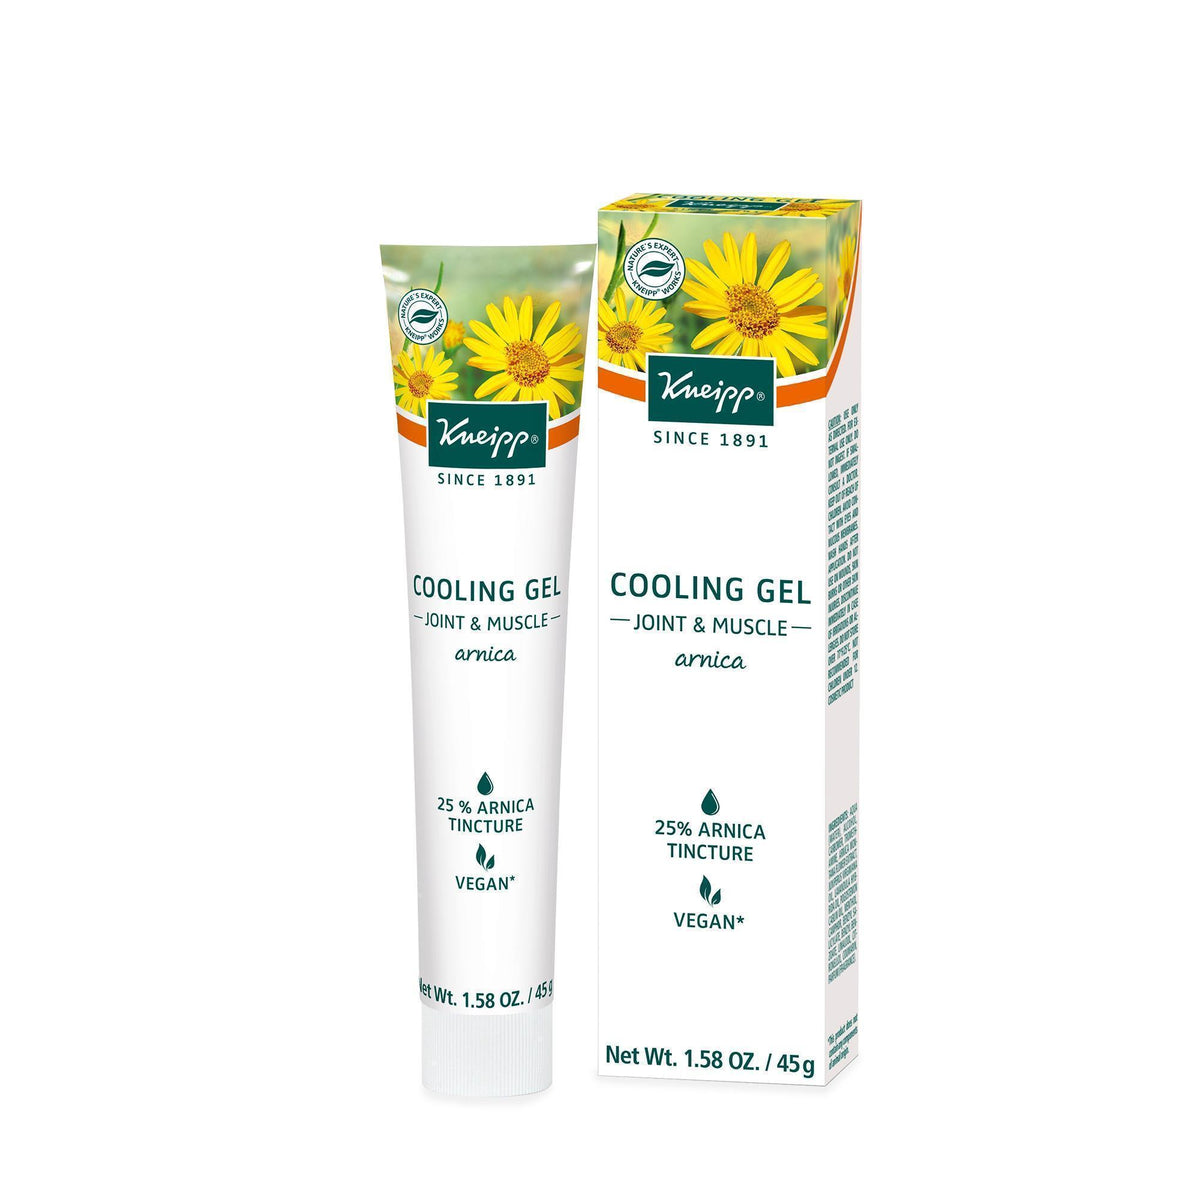 Kneipp Cooling Joint & Muscle Gel 1.58 Oz.